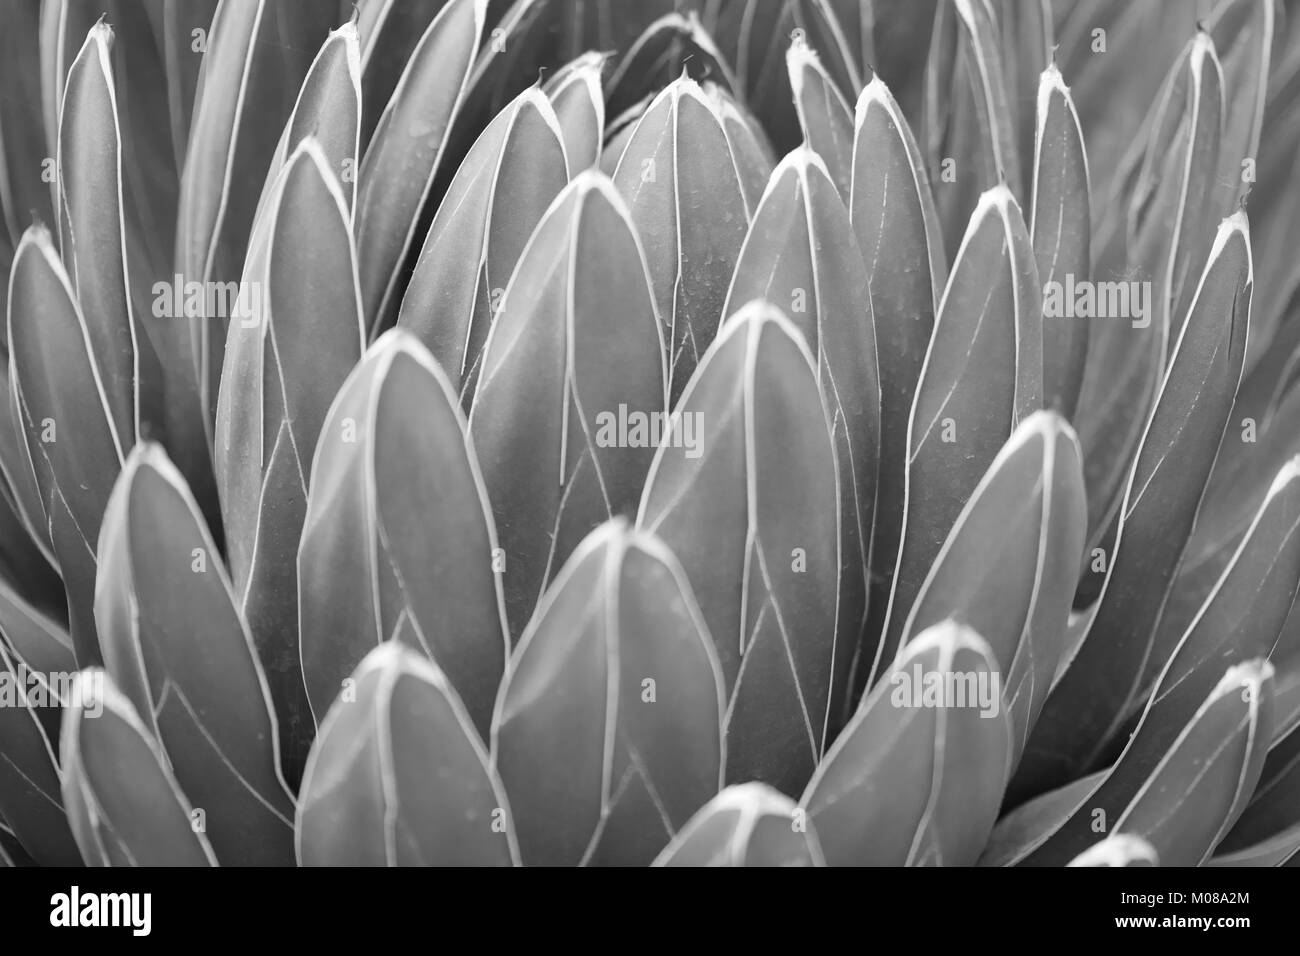 Agave victoriae reginae leaves texture background in black and white Stock Photo